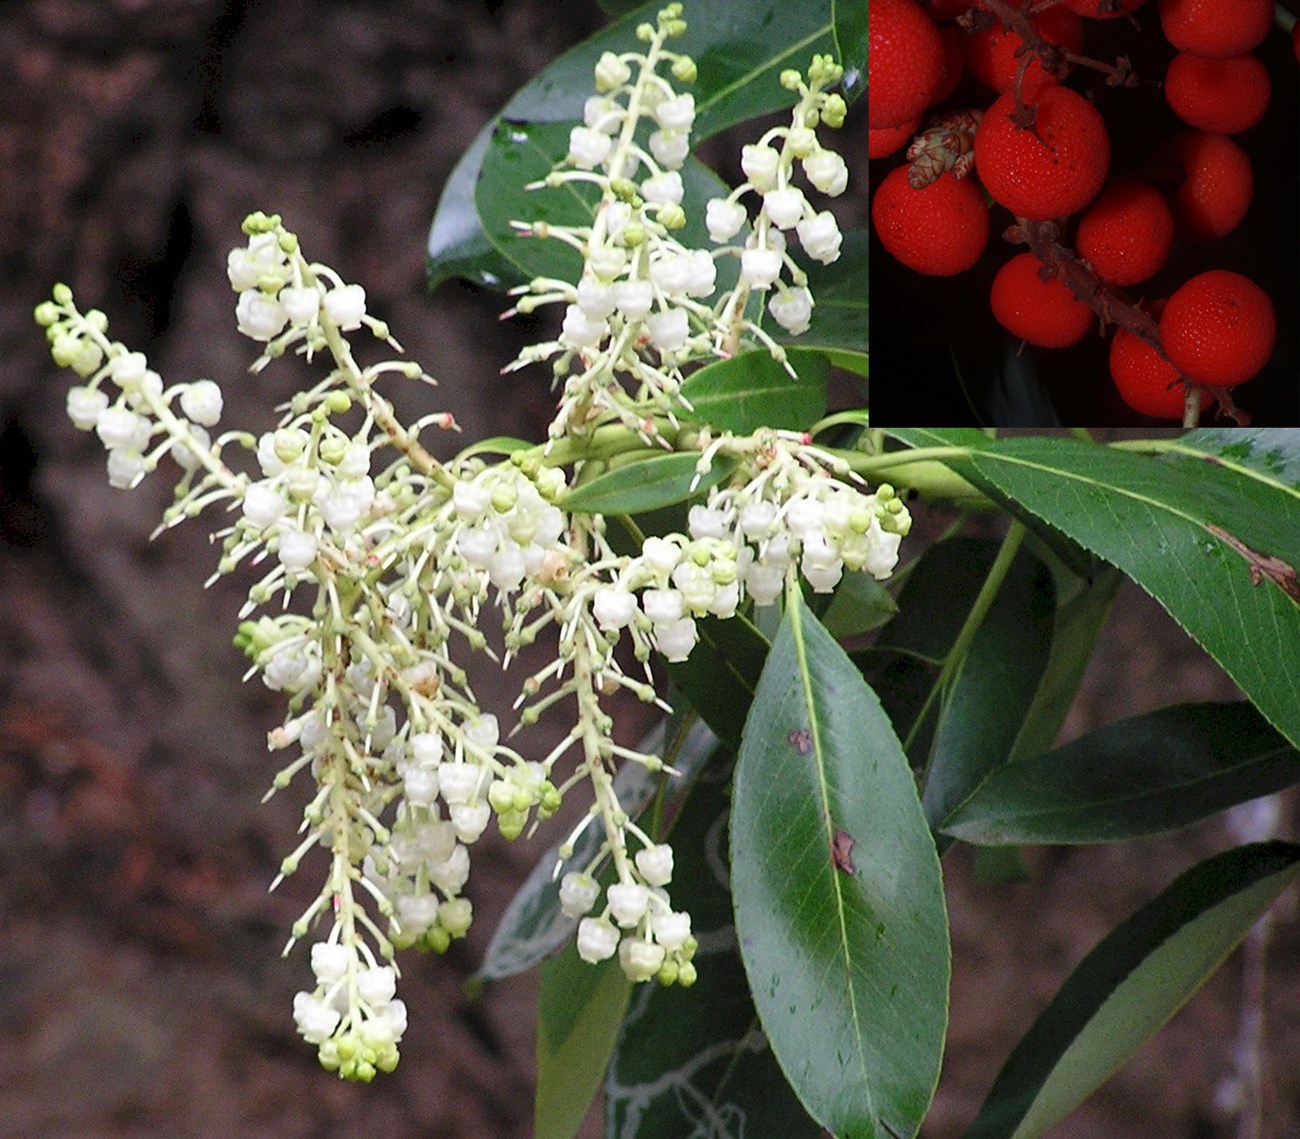 White Pacific madrone flowers and leaves. Inset: red madrone berries.